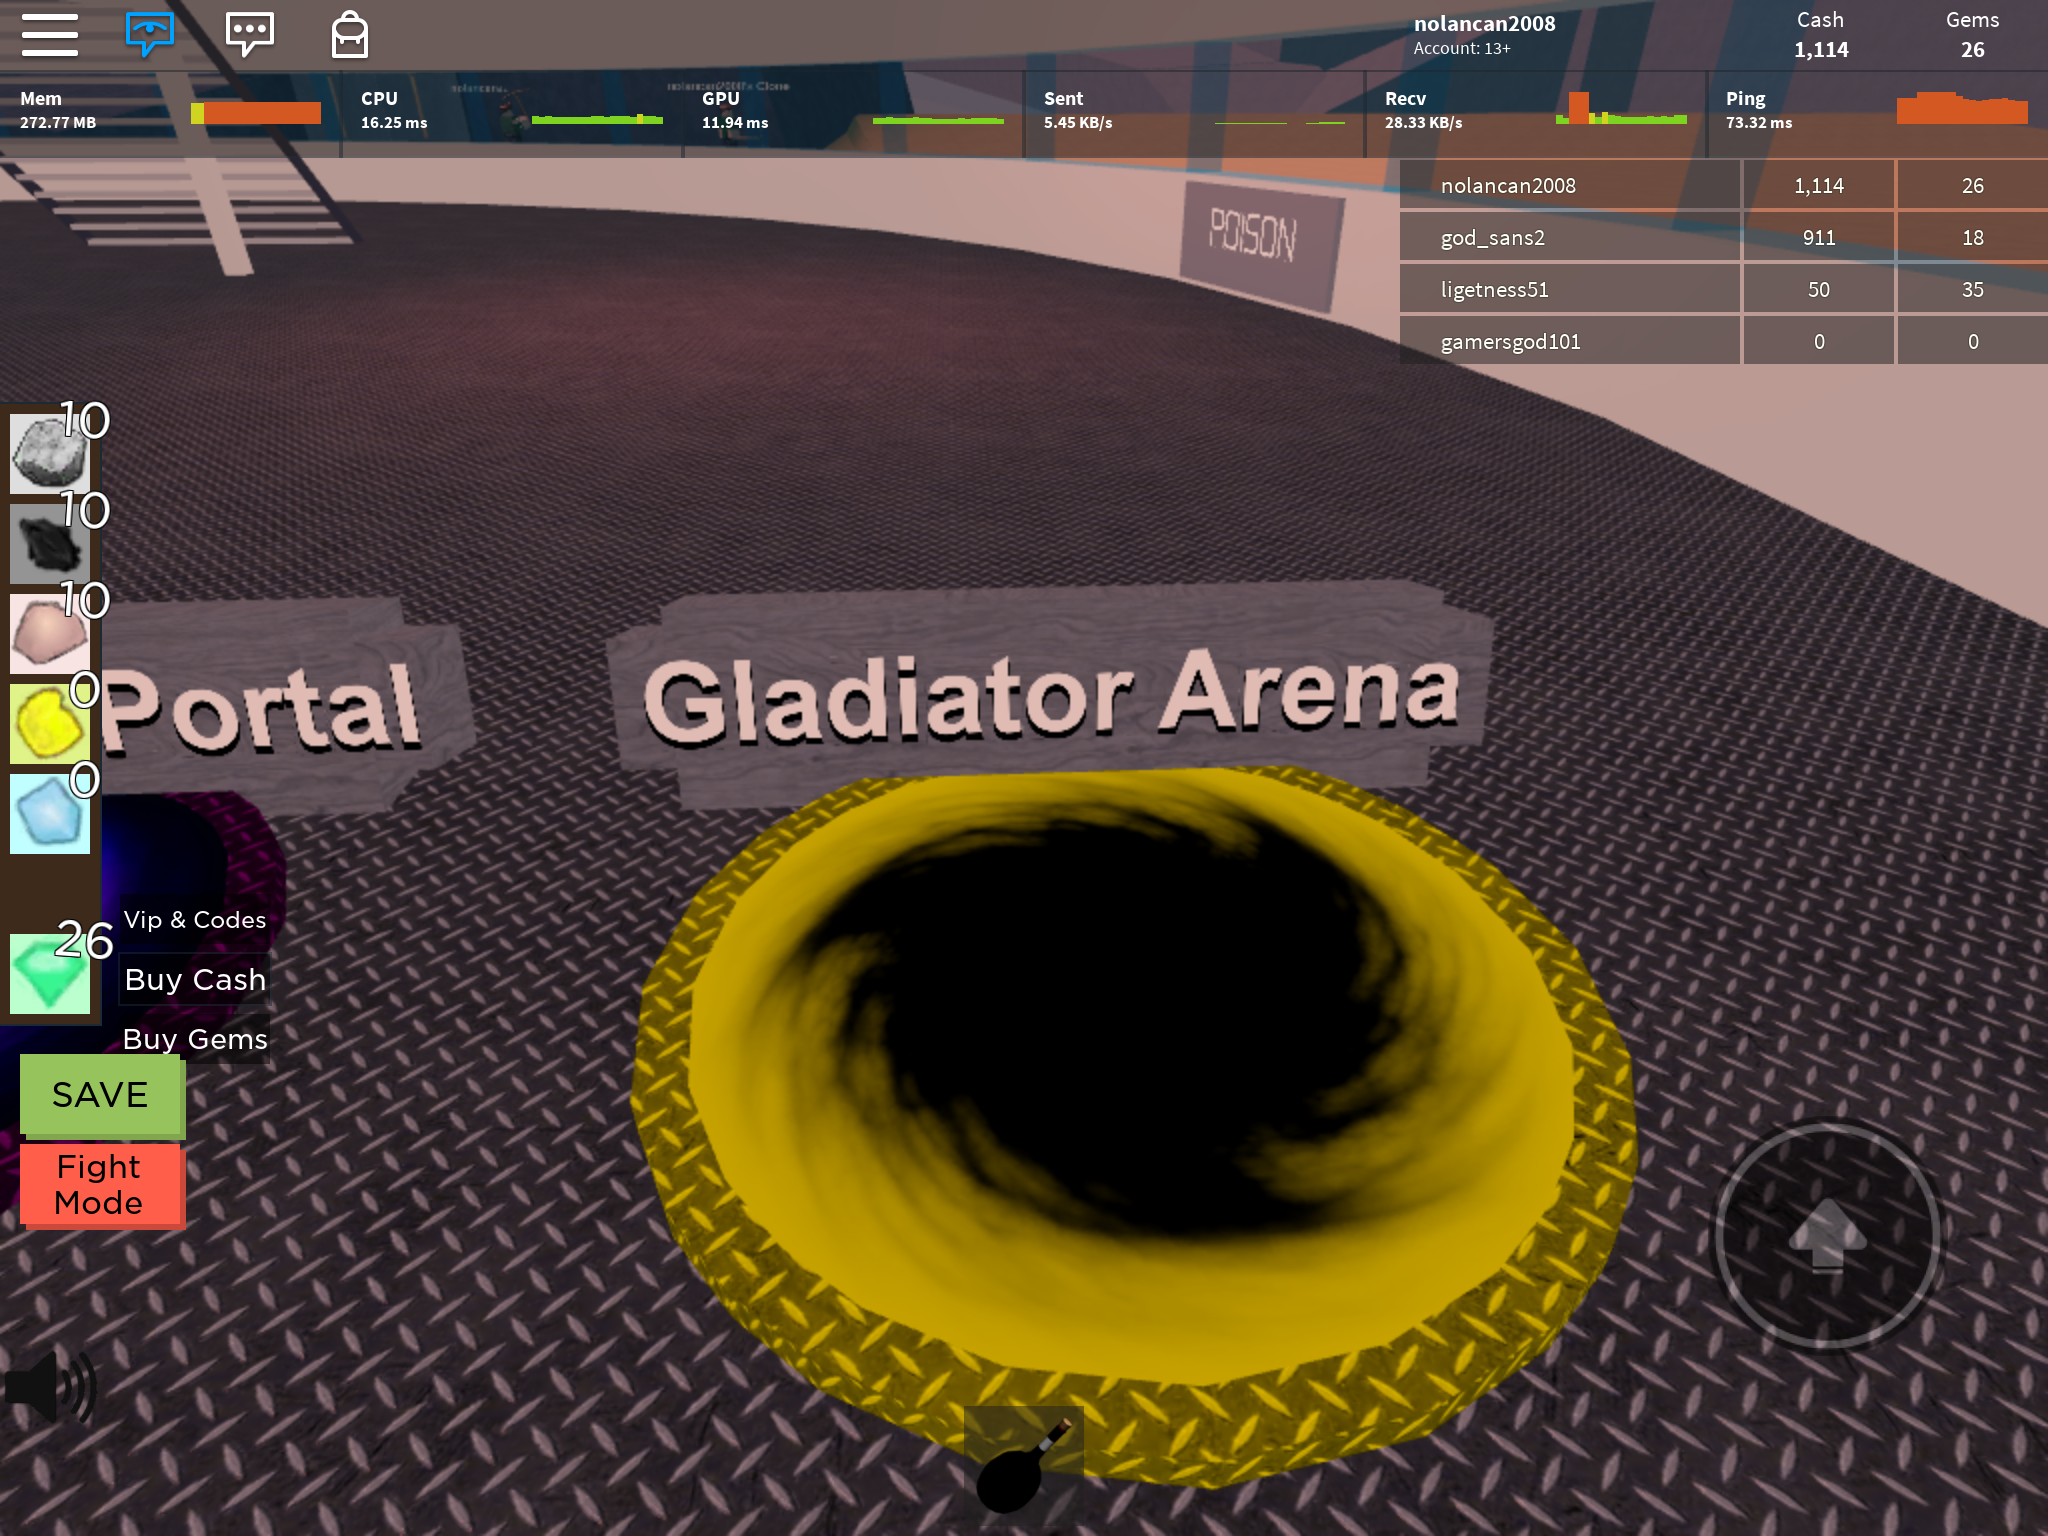 Gladiator Arena Clone Tycoon 2 Wiki Fandom - codes for gems in clone tycoon 2 in roblox